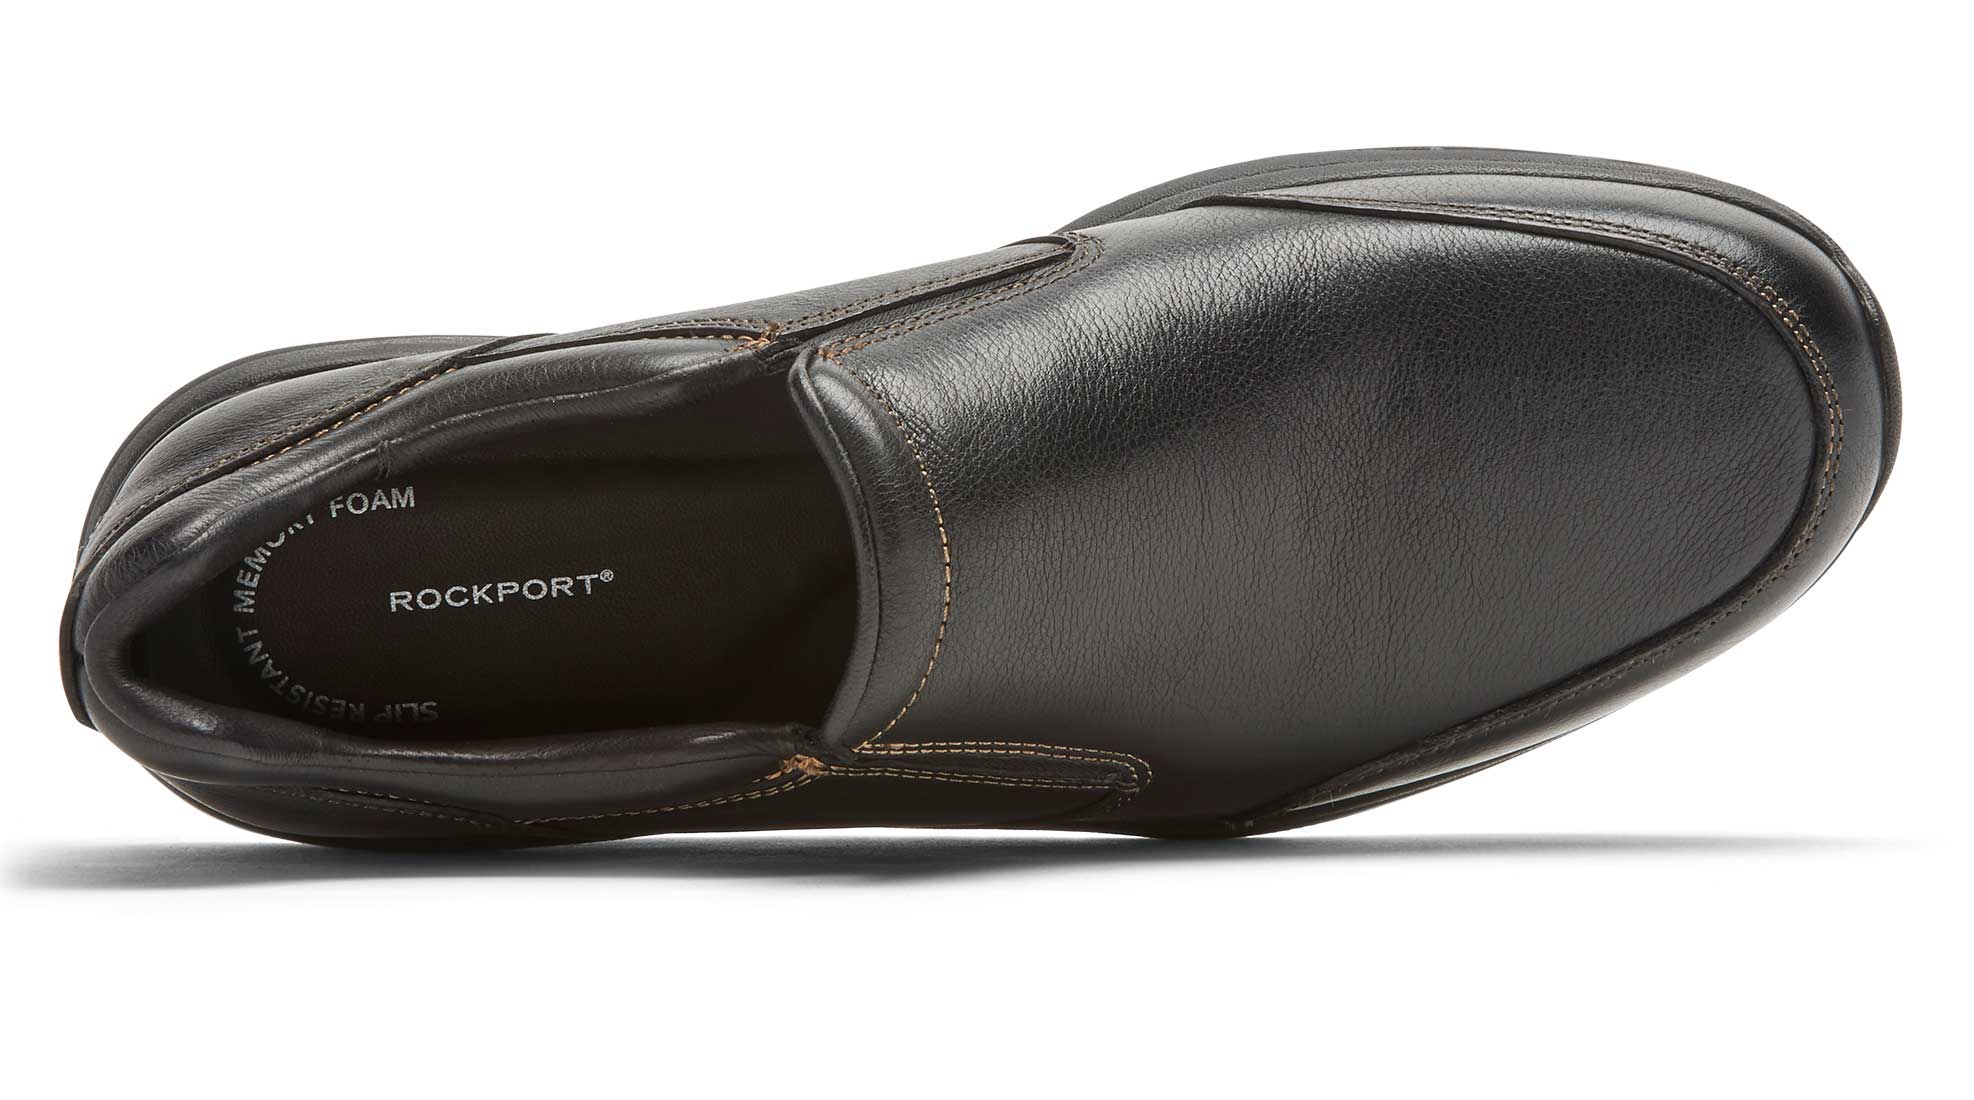 Rockport Edge Hill 2 CH5181 Men's Black - Double Gore Casual Slip-On Shoe -  Extra Wide Comfort Shoe